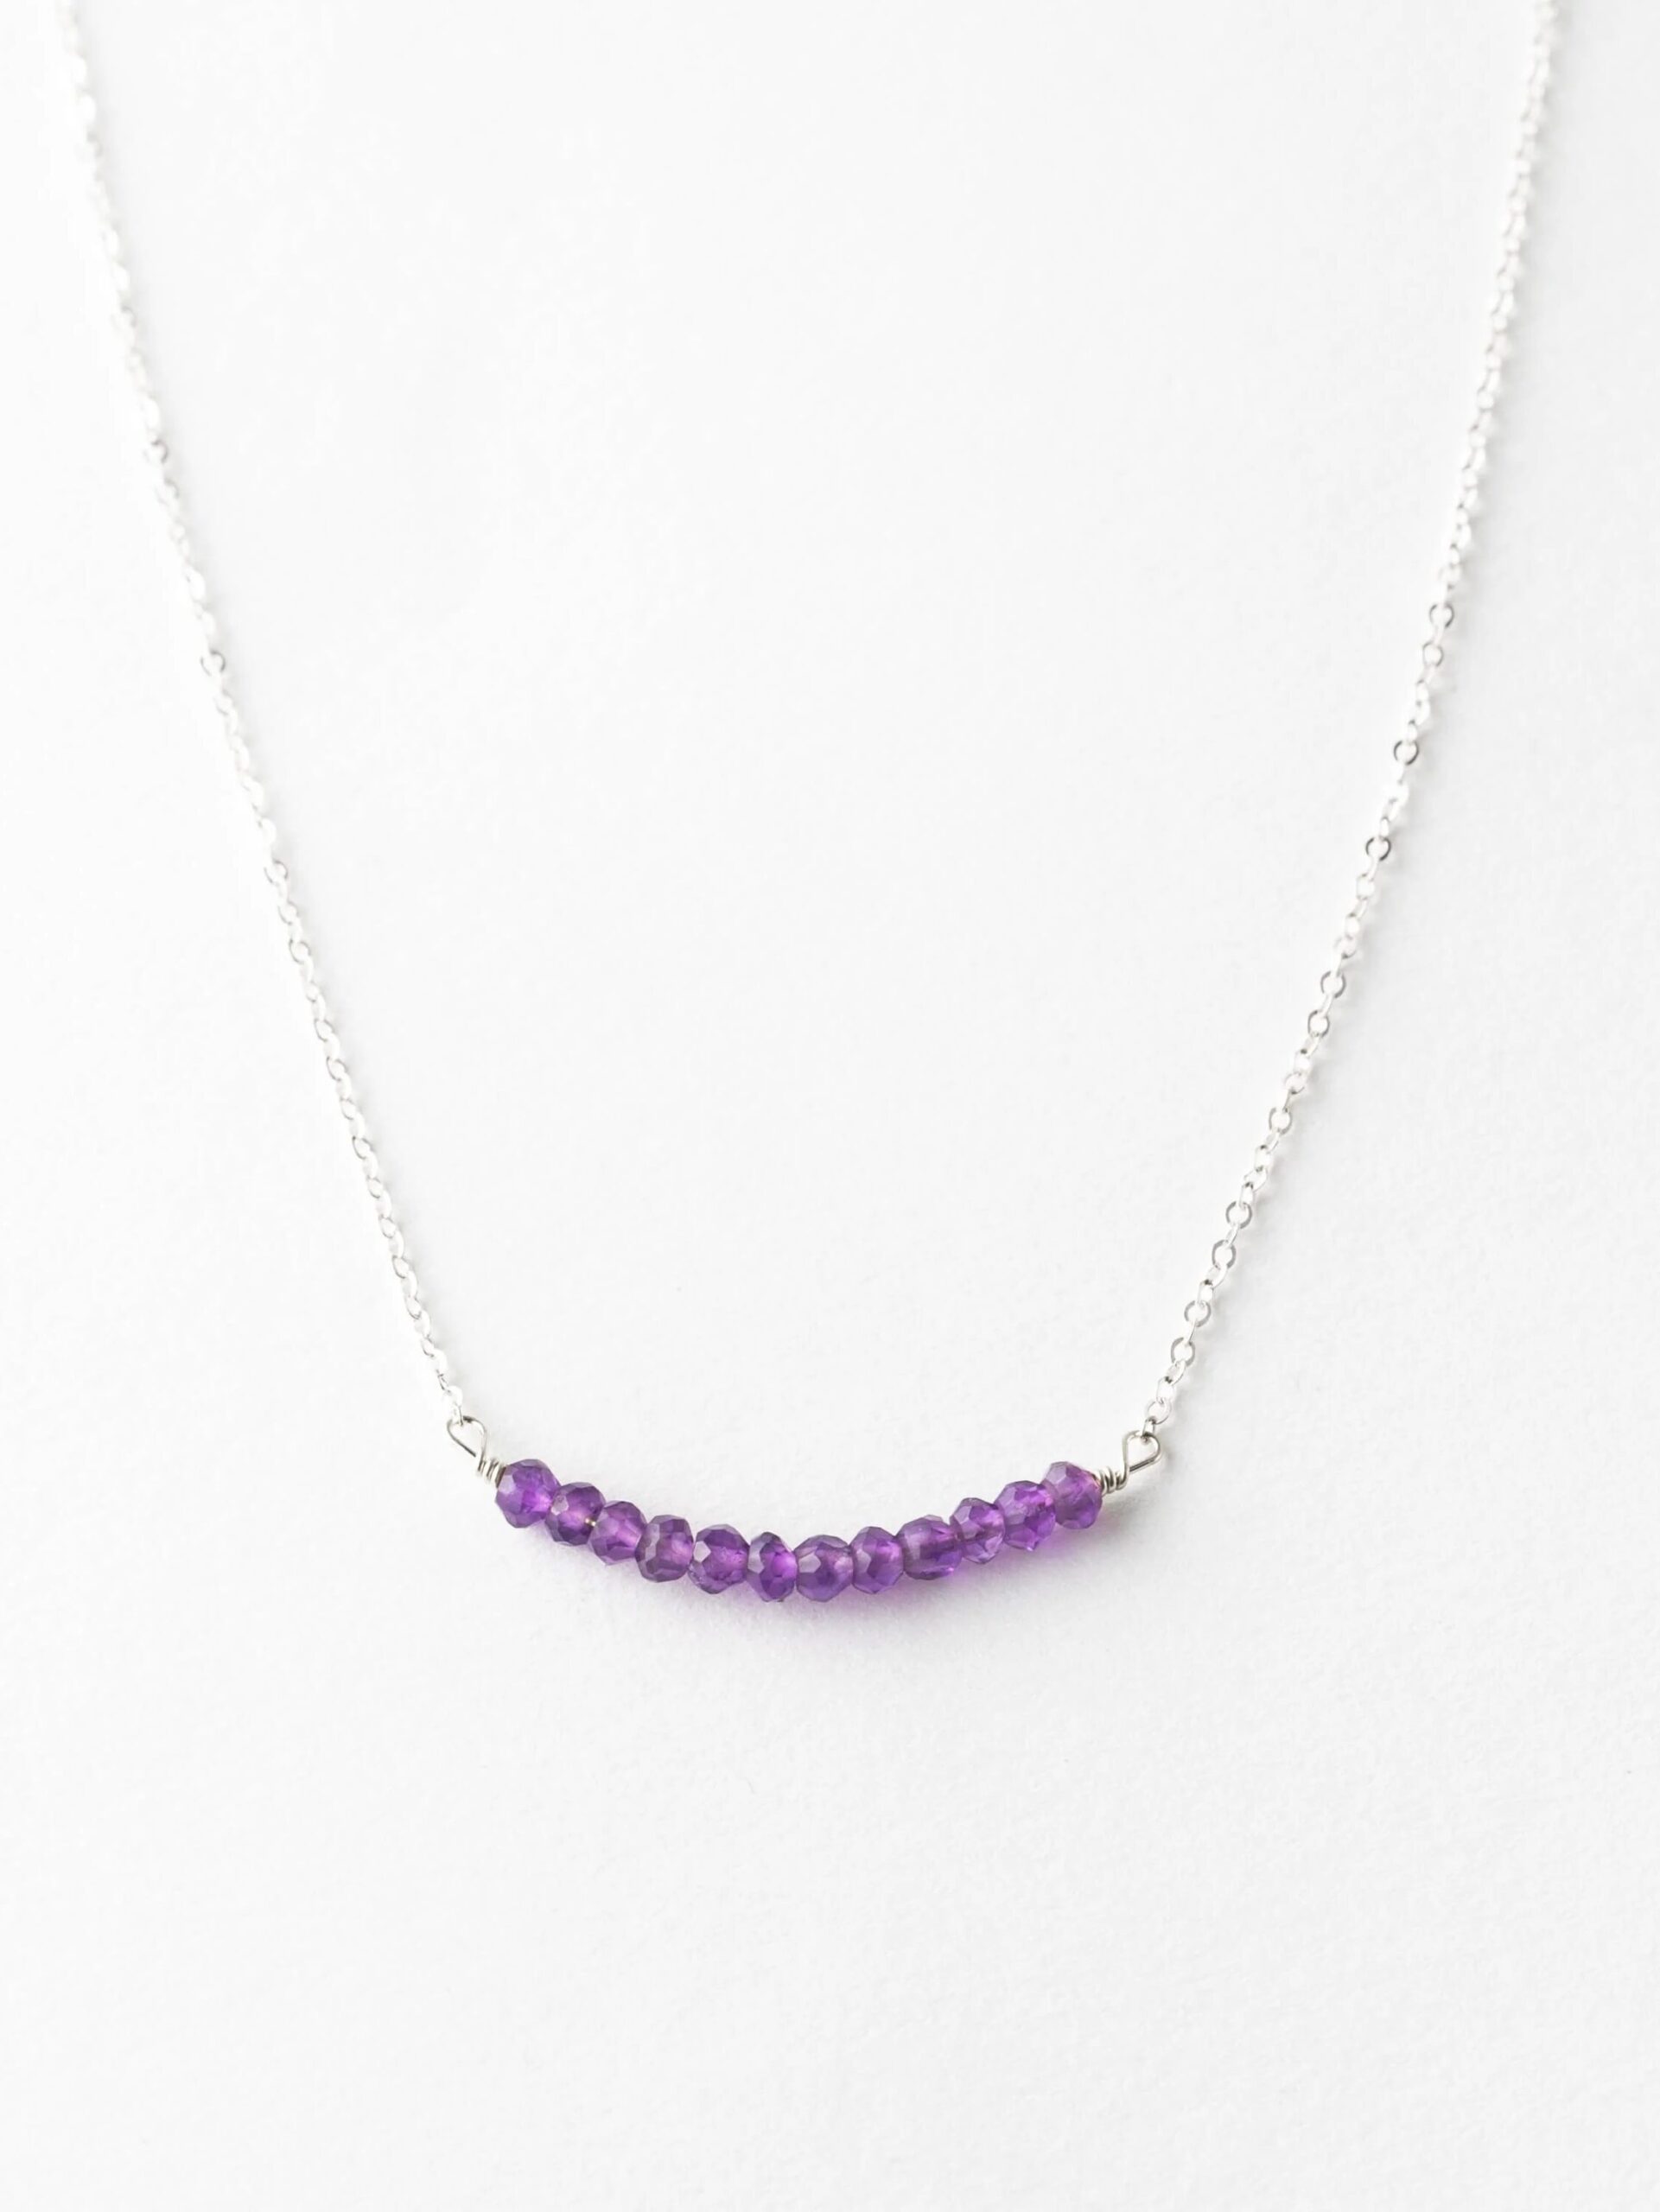 Silver necklace with a curved row of purple beads against a white background.